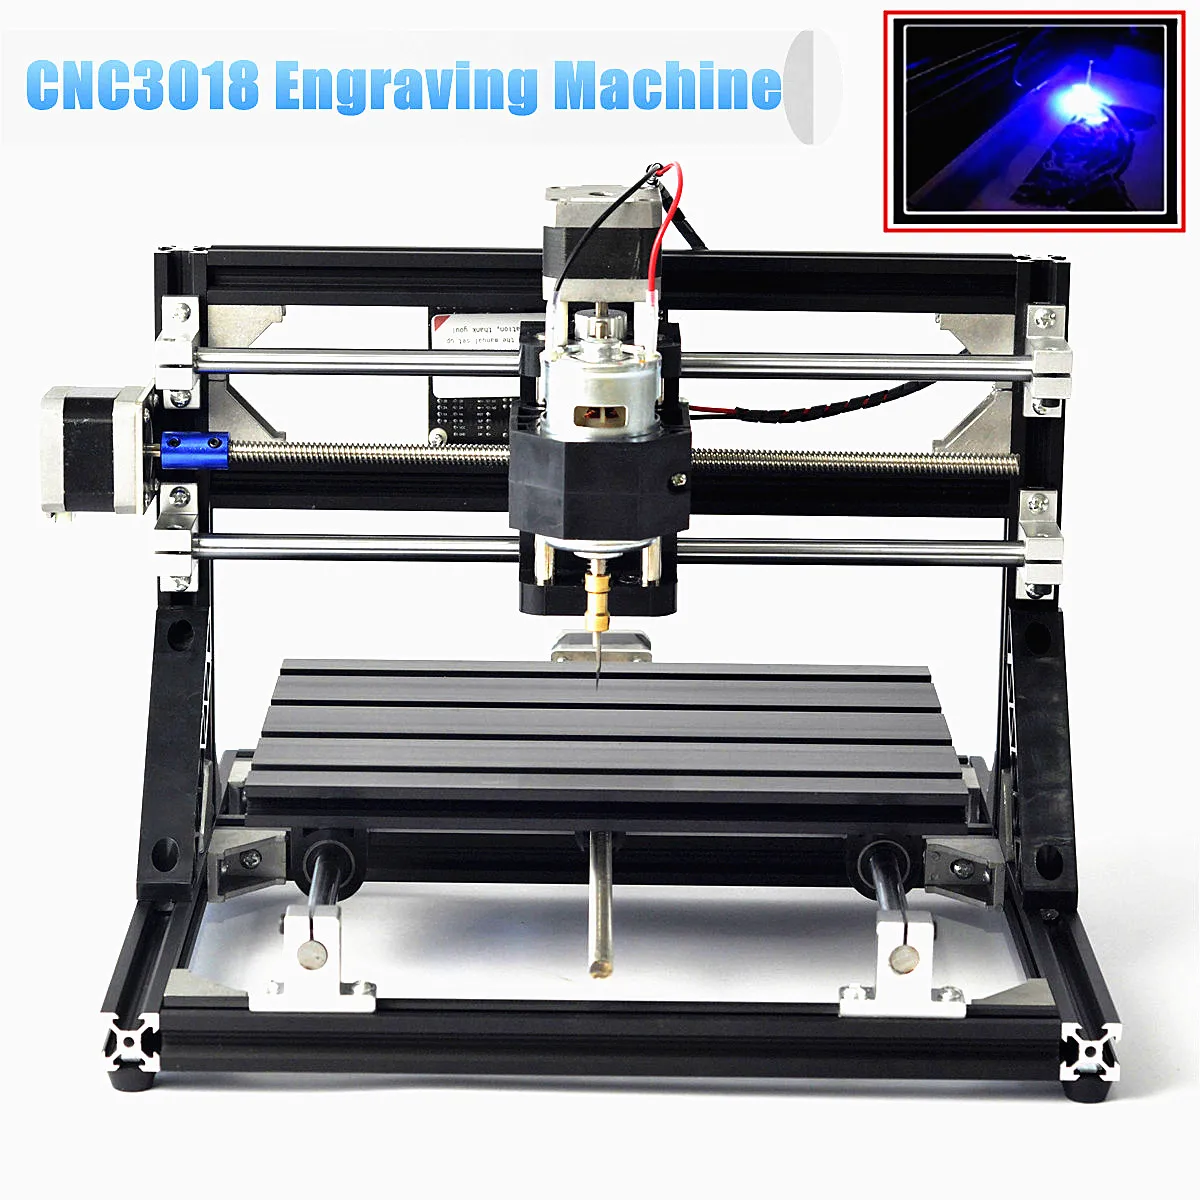 110V -240V CNC 3018 Engraving Machine Wood Router Woodworking Machinery Carving Machine or with 5500mW/2500mW Laser Head